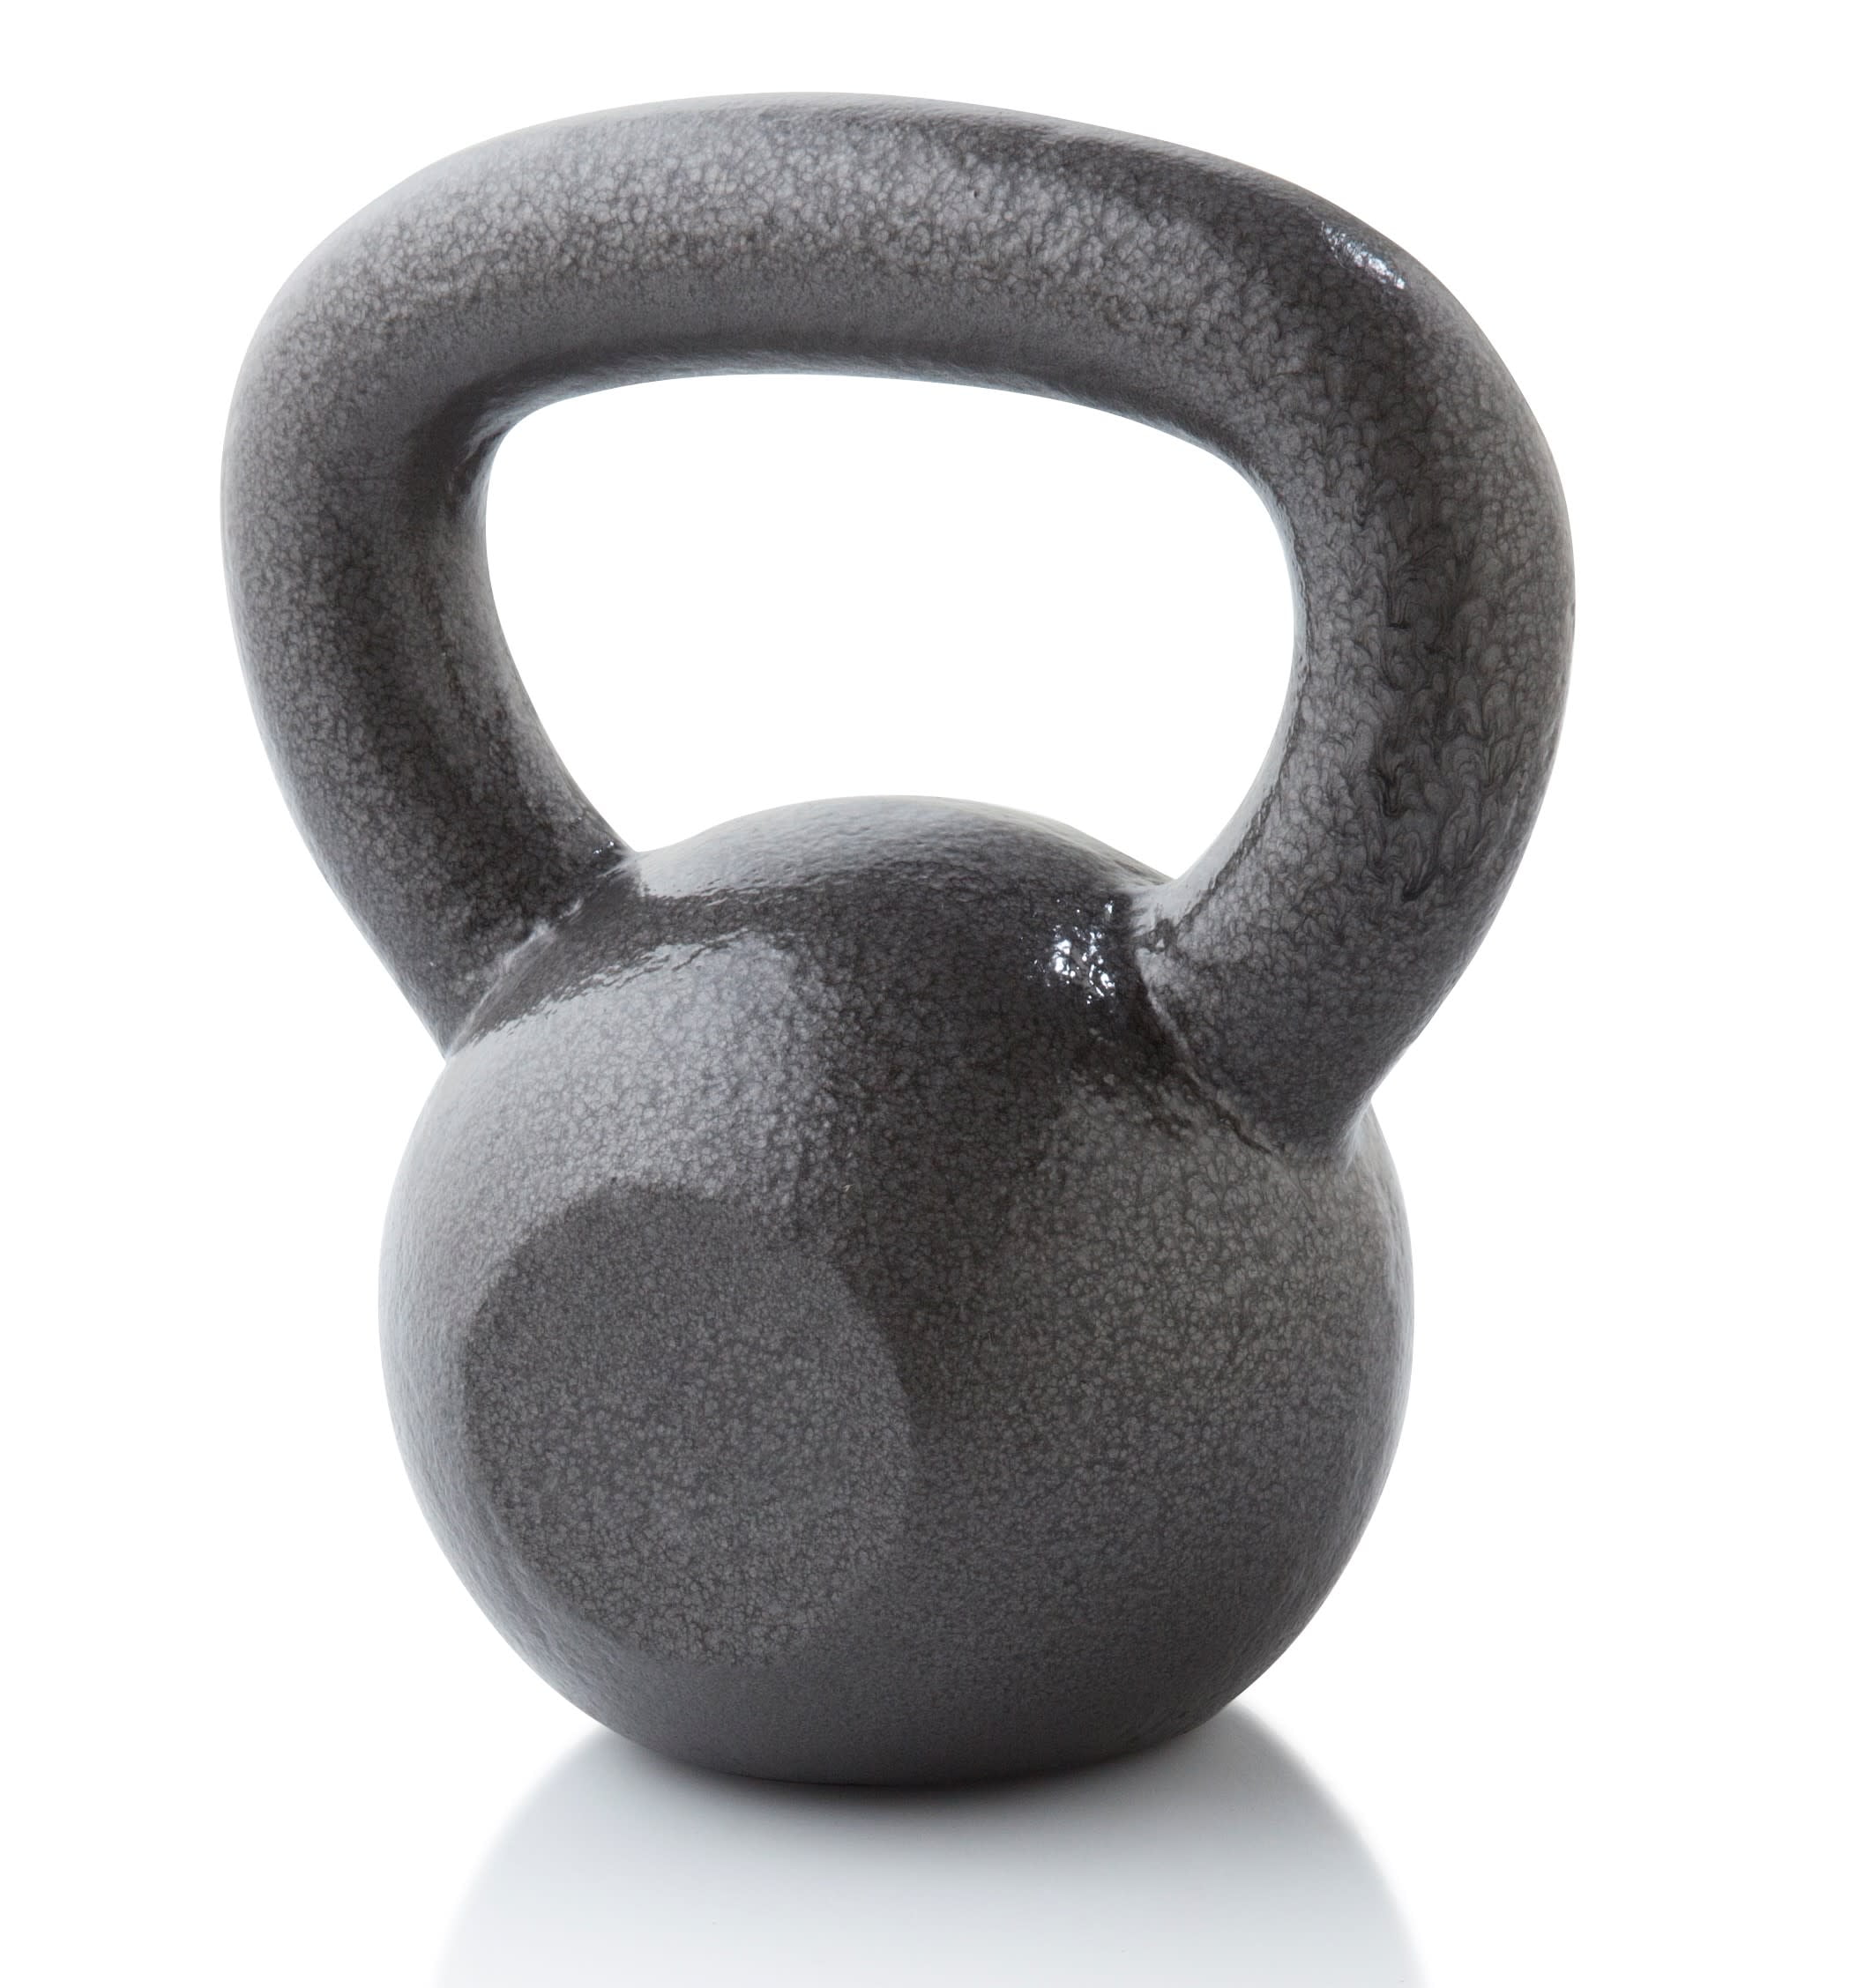 Free Shipping PRCTZ Solid Cast Iron Kettlebell New 35 LBS 